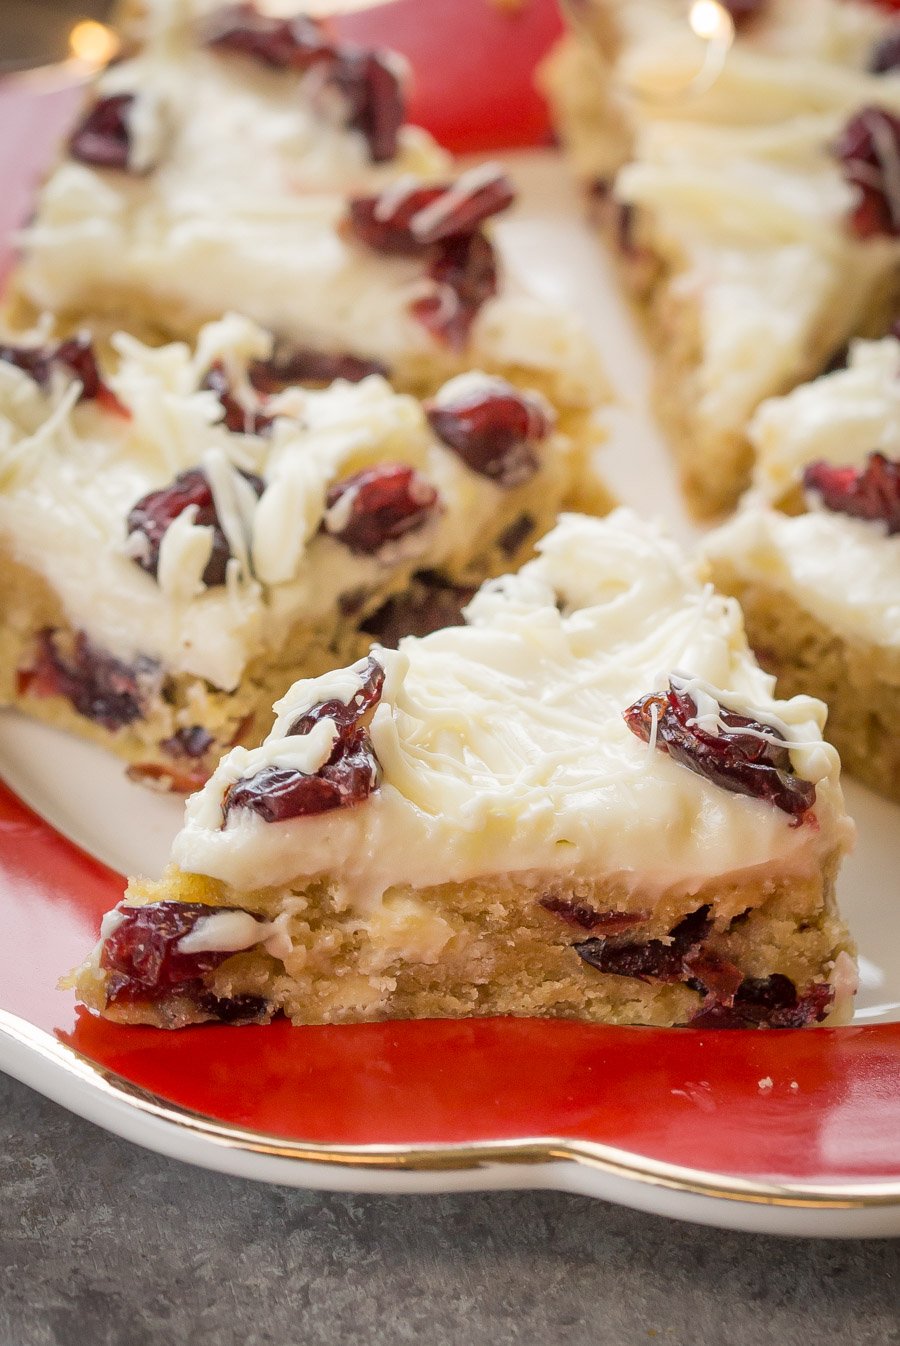 Cranberry Bliss Bars topped with a glaze and cranberries on a plate.